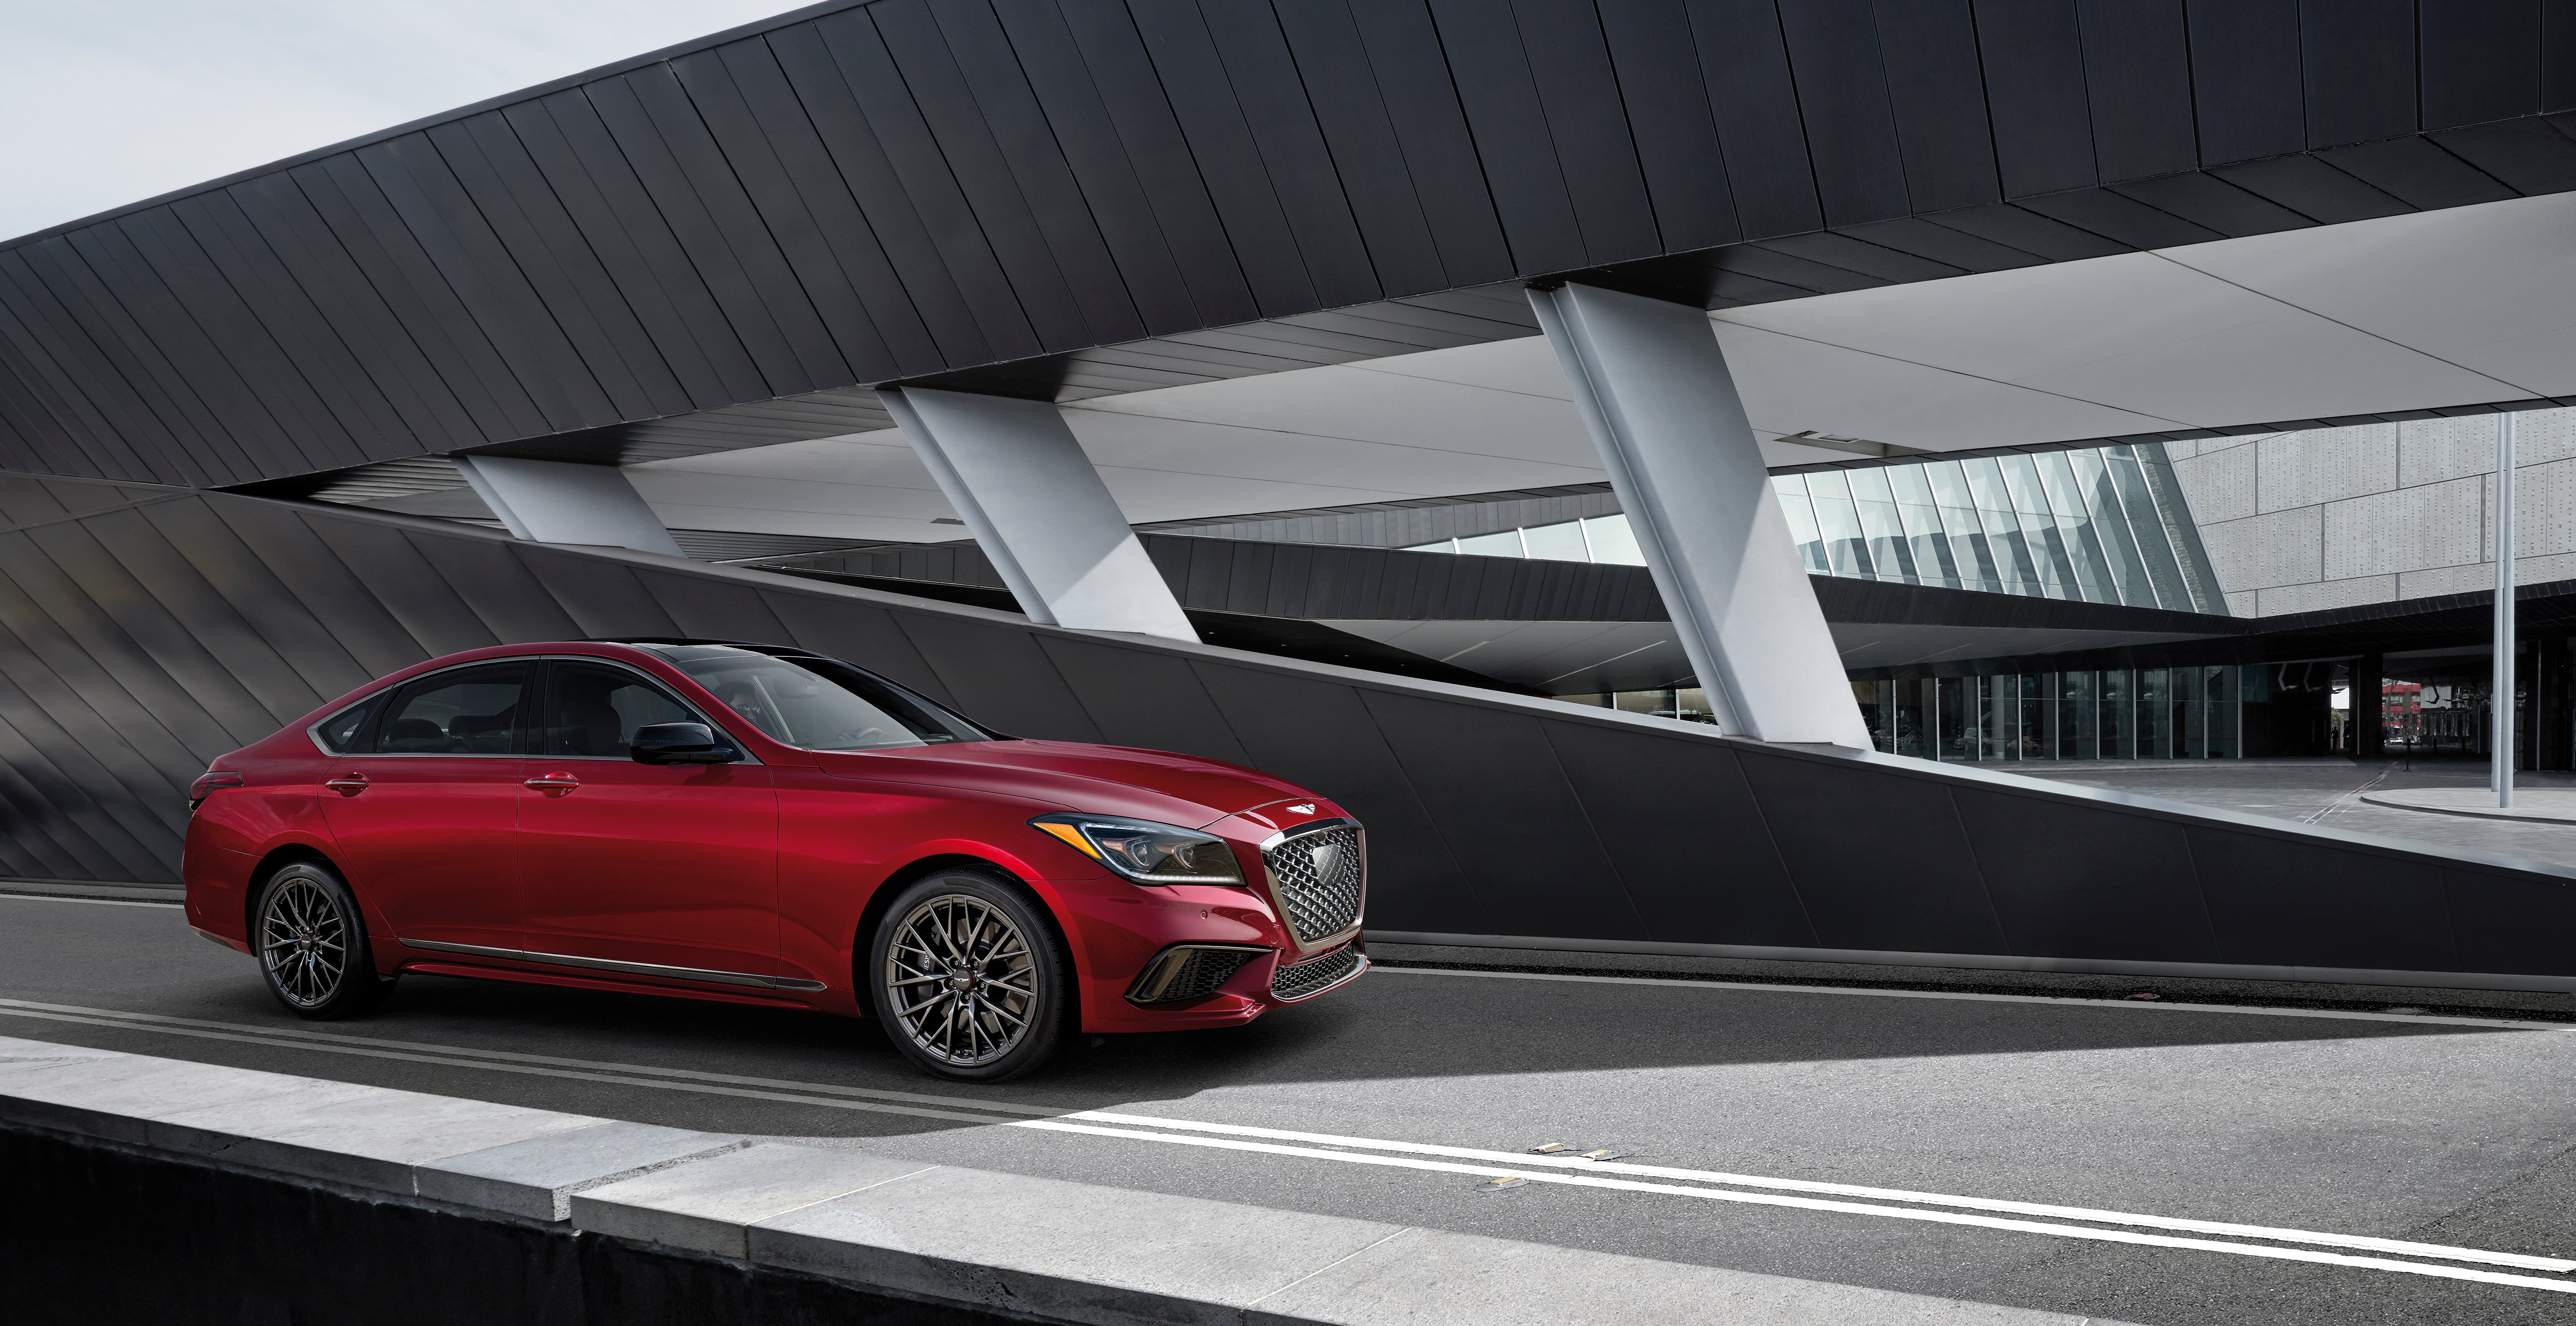 Genesis G80 and G90 Earn 2018 IIHS “Top Safety Pick+” Ratings